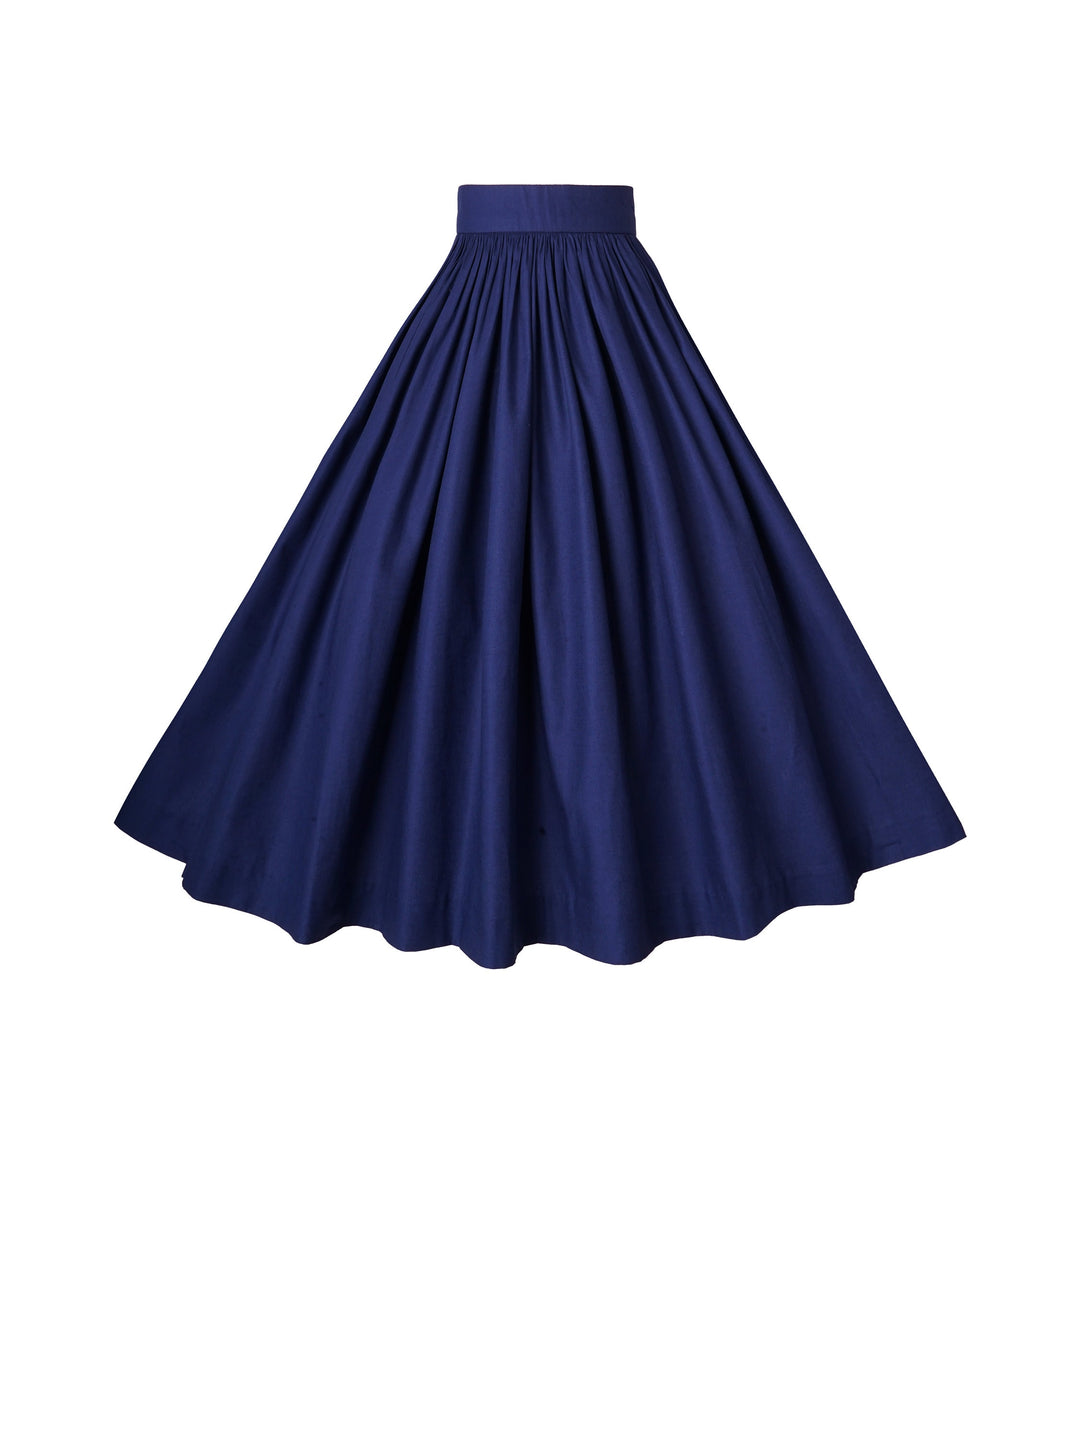 RTS - Size L - Lola Skirt in Navy Blue Cotton